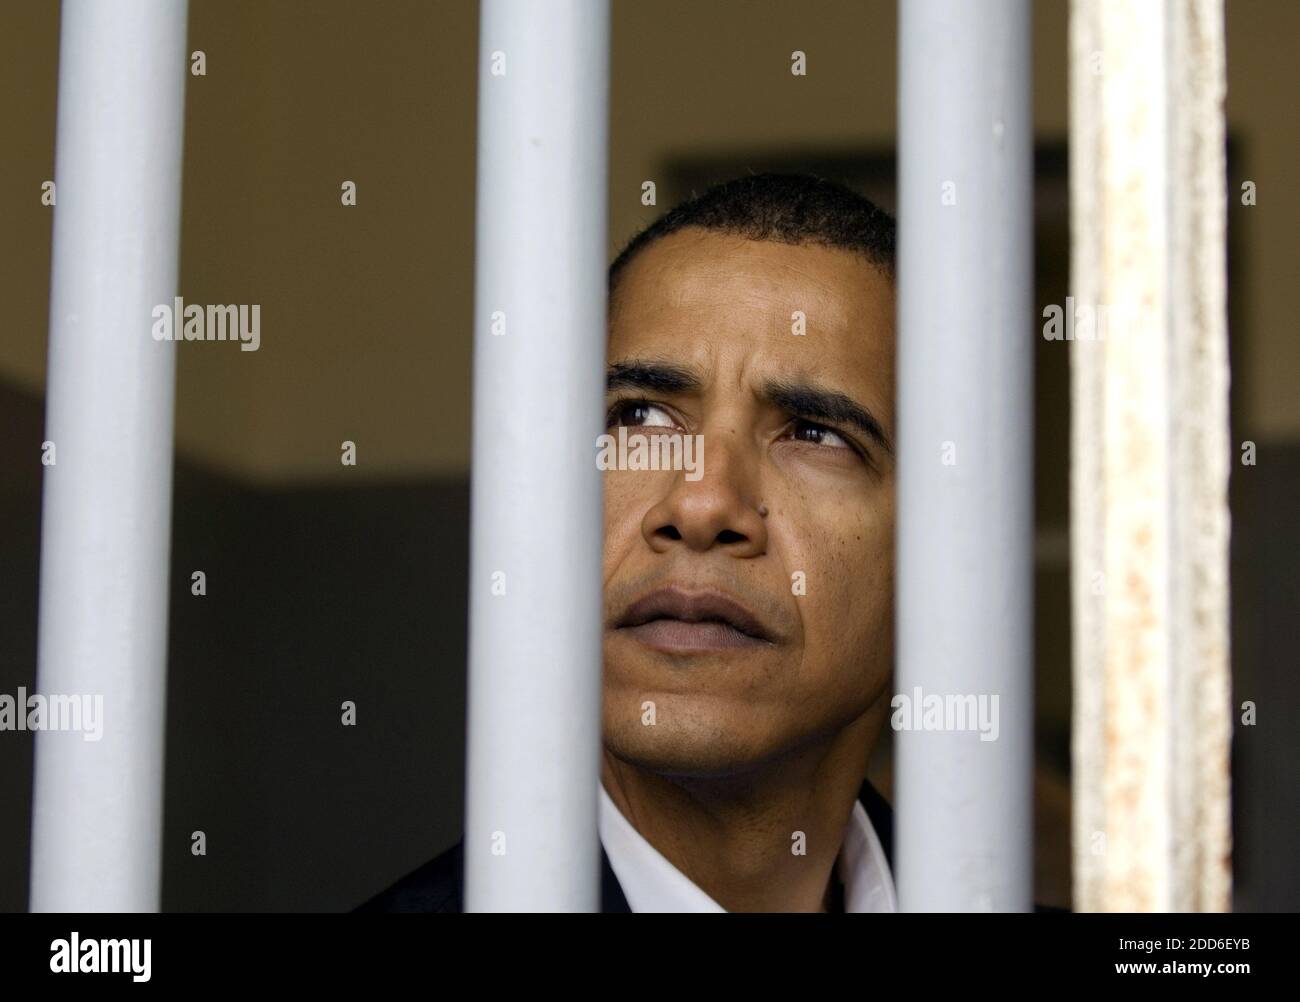 NO FILM, NO VIDEO, NO TV, NO DOCUMENTARY - Sen. Barack Obama (D-Ill.) peers out of what was Nelson Mandela's prison cell on Robben Island off the coast of Cape Town, South Africa, Sunday, August 20, 2006. Photo by Pete Souza/Chicago Tribune/MCT/ABACAPRESS.COM Stock Photo